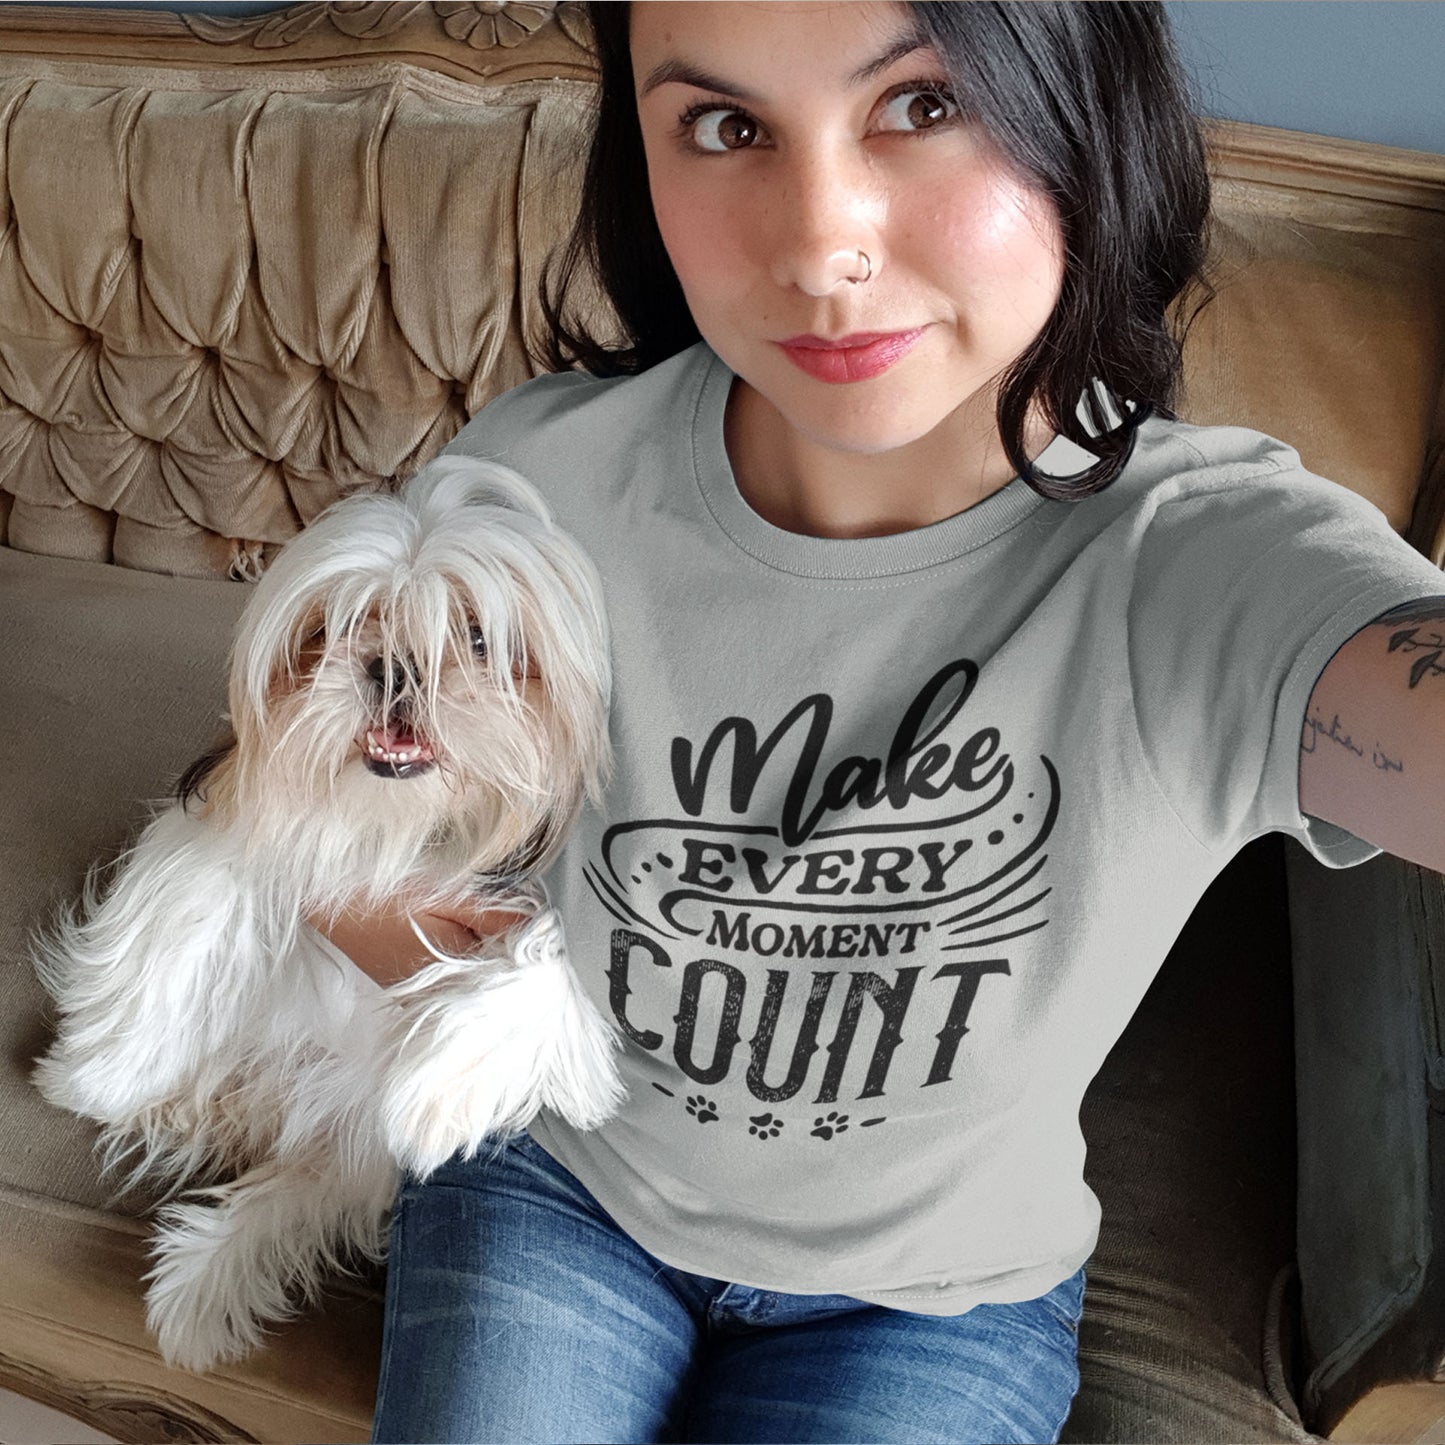  A woman wearing a Dogs Pure Love tee with the slogan "Make Every Moment Count" sits on the sofa, taking a selfie with her Affenpinscher dog.